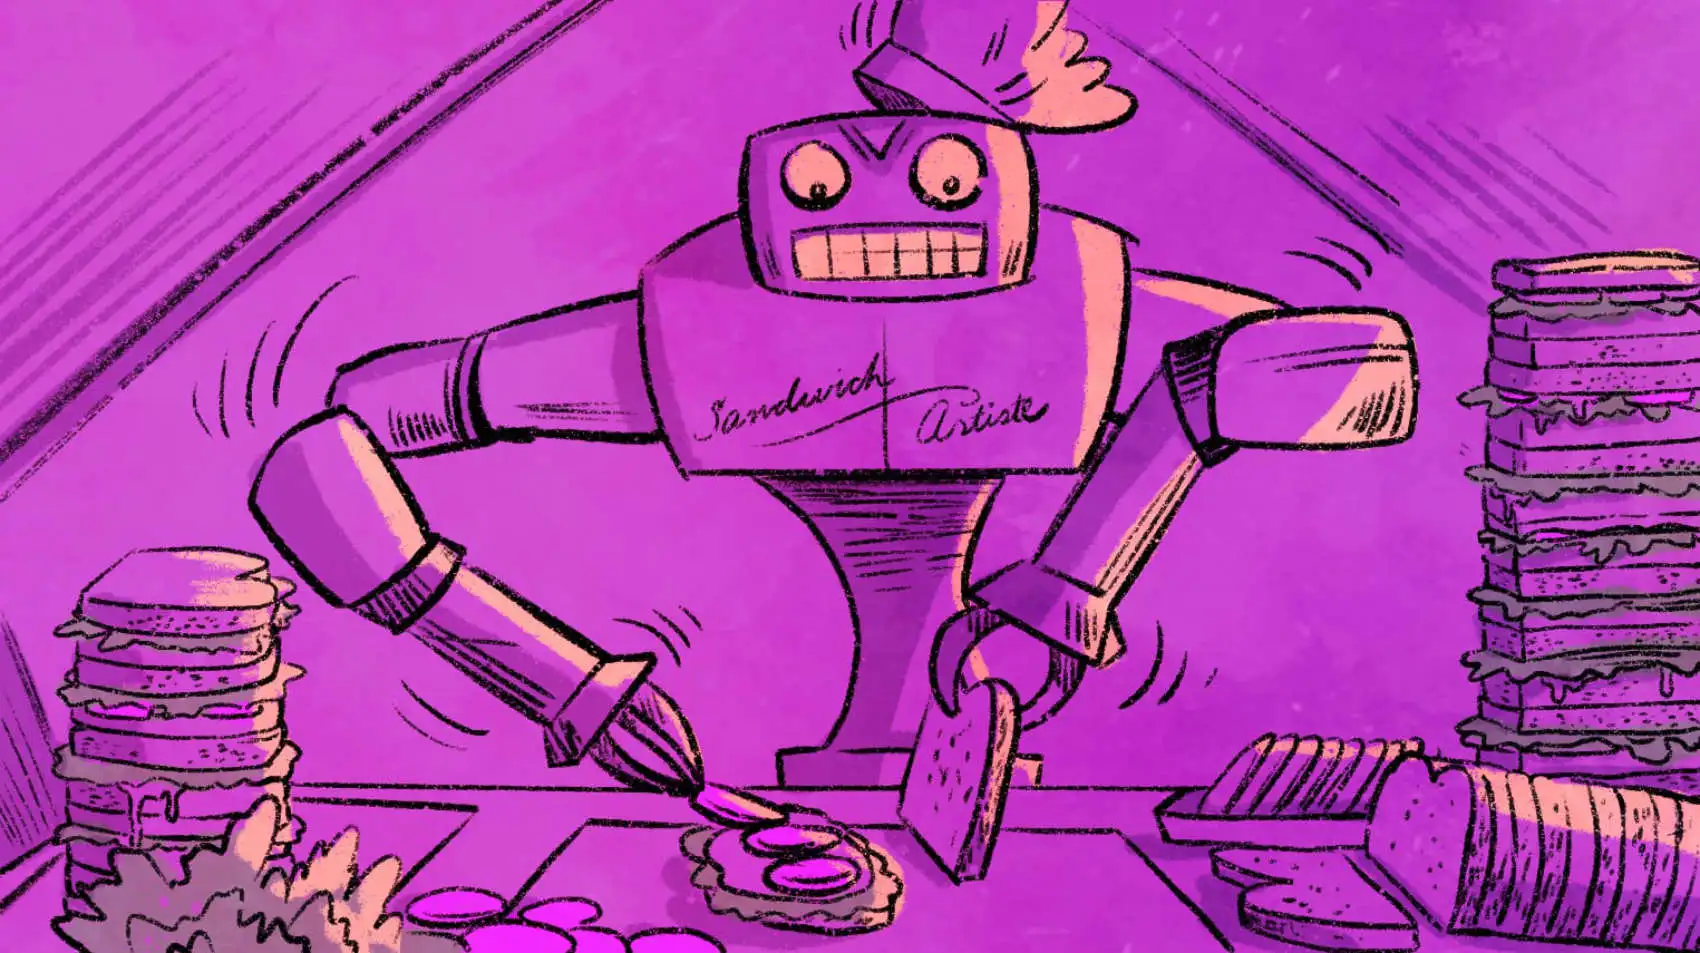 A robot furiously making sandwiches.